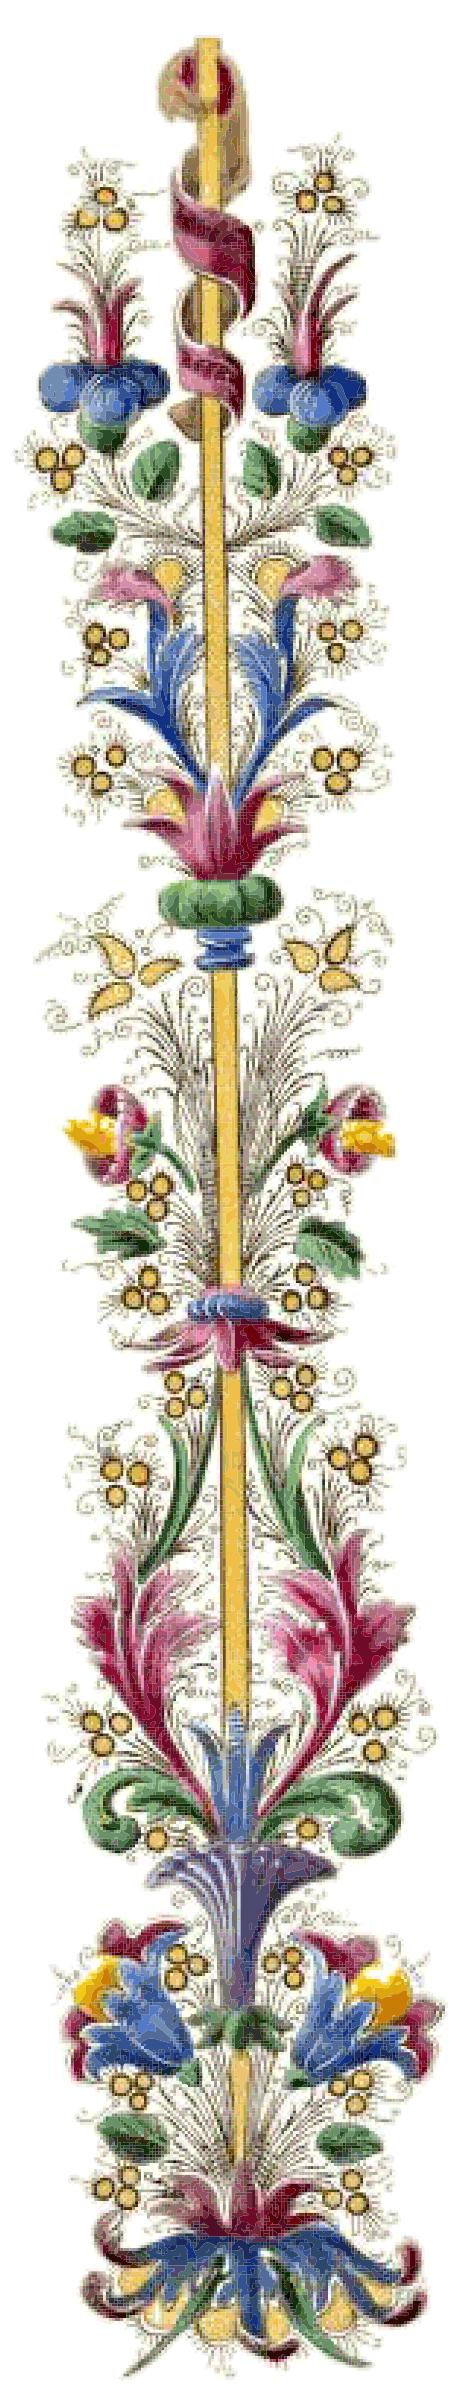 Florentine style ornament png